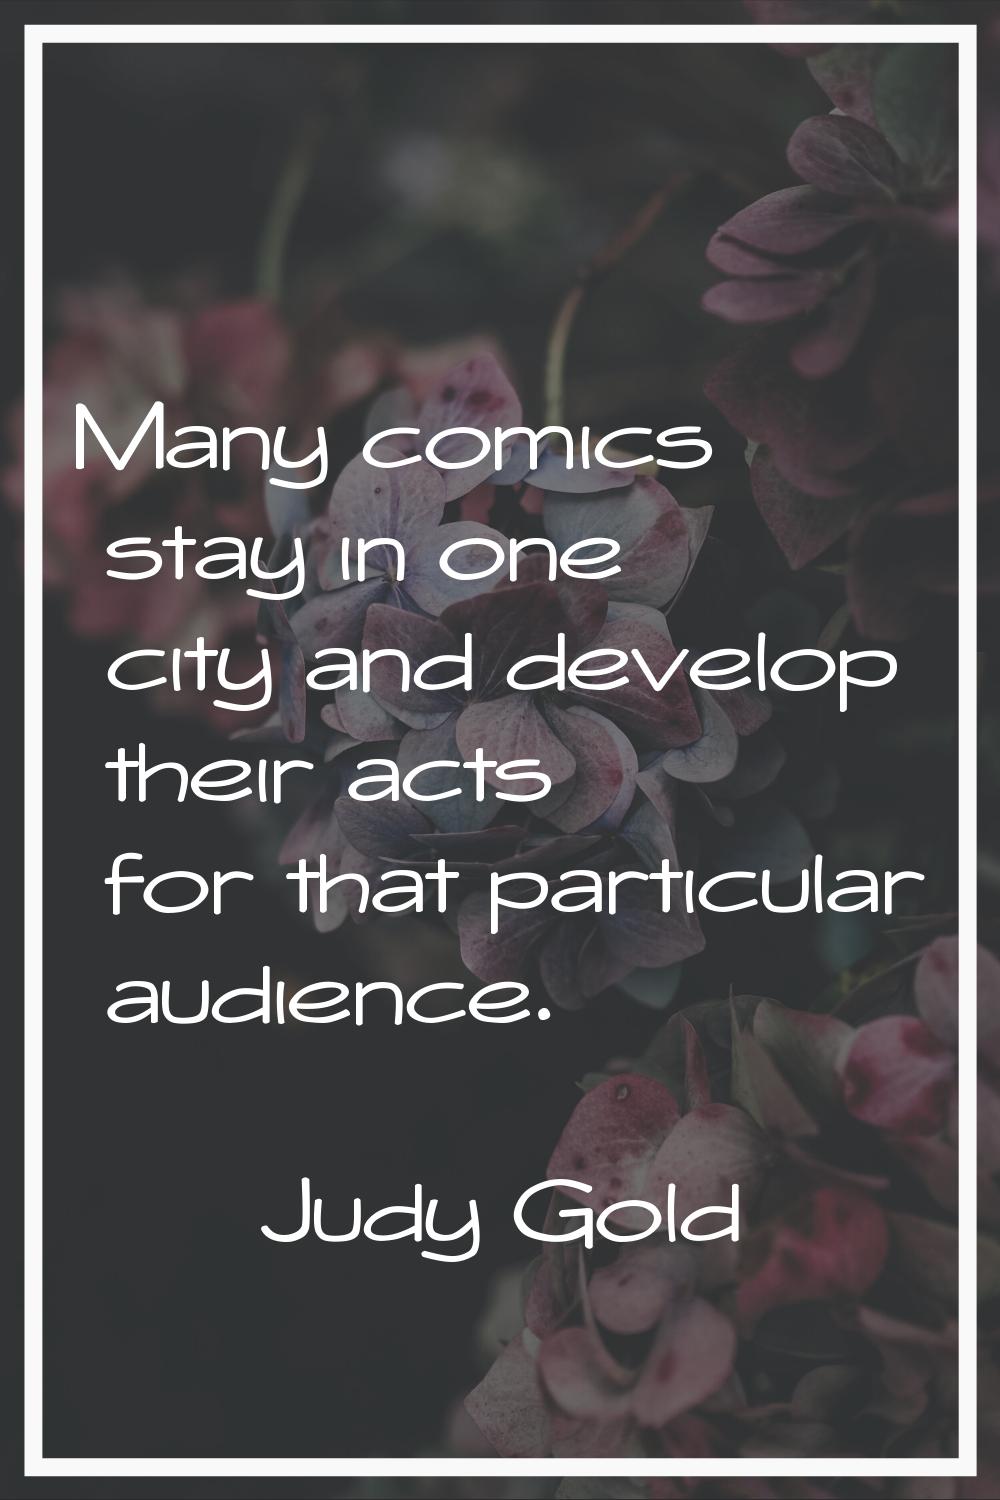 Many comics stay in one city and develop their acts for that particular audience.